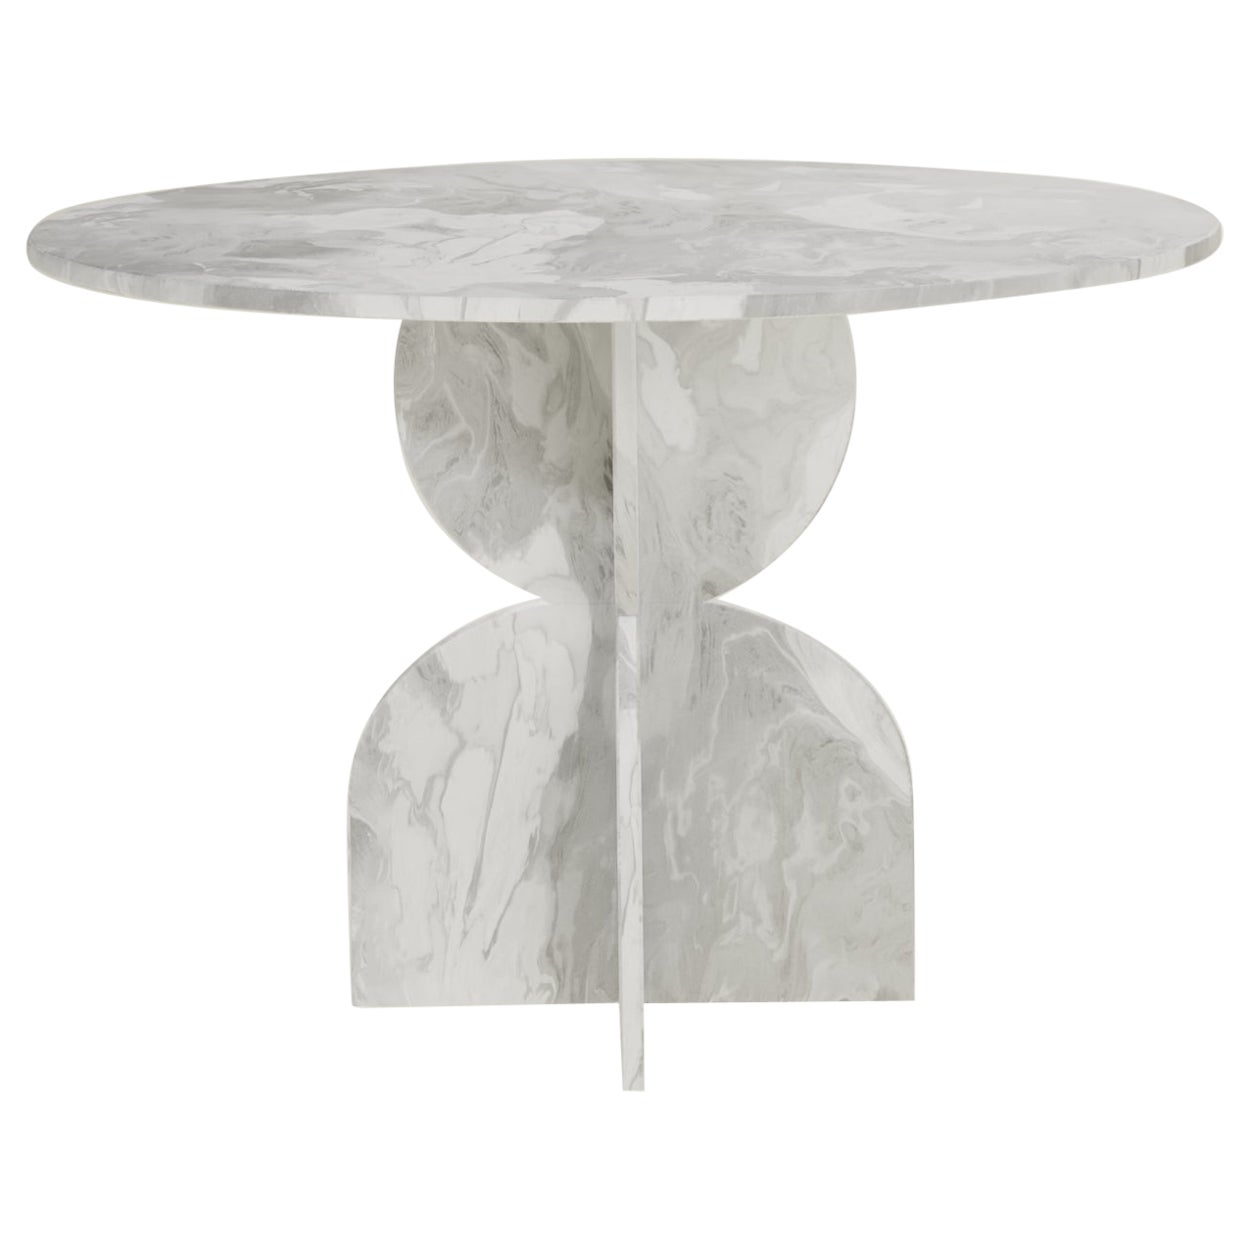 Contemporary White Round Table Handcrafted 100% Recycled Plastic by Anqa Studios For Sale